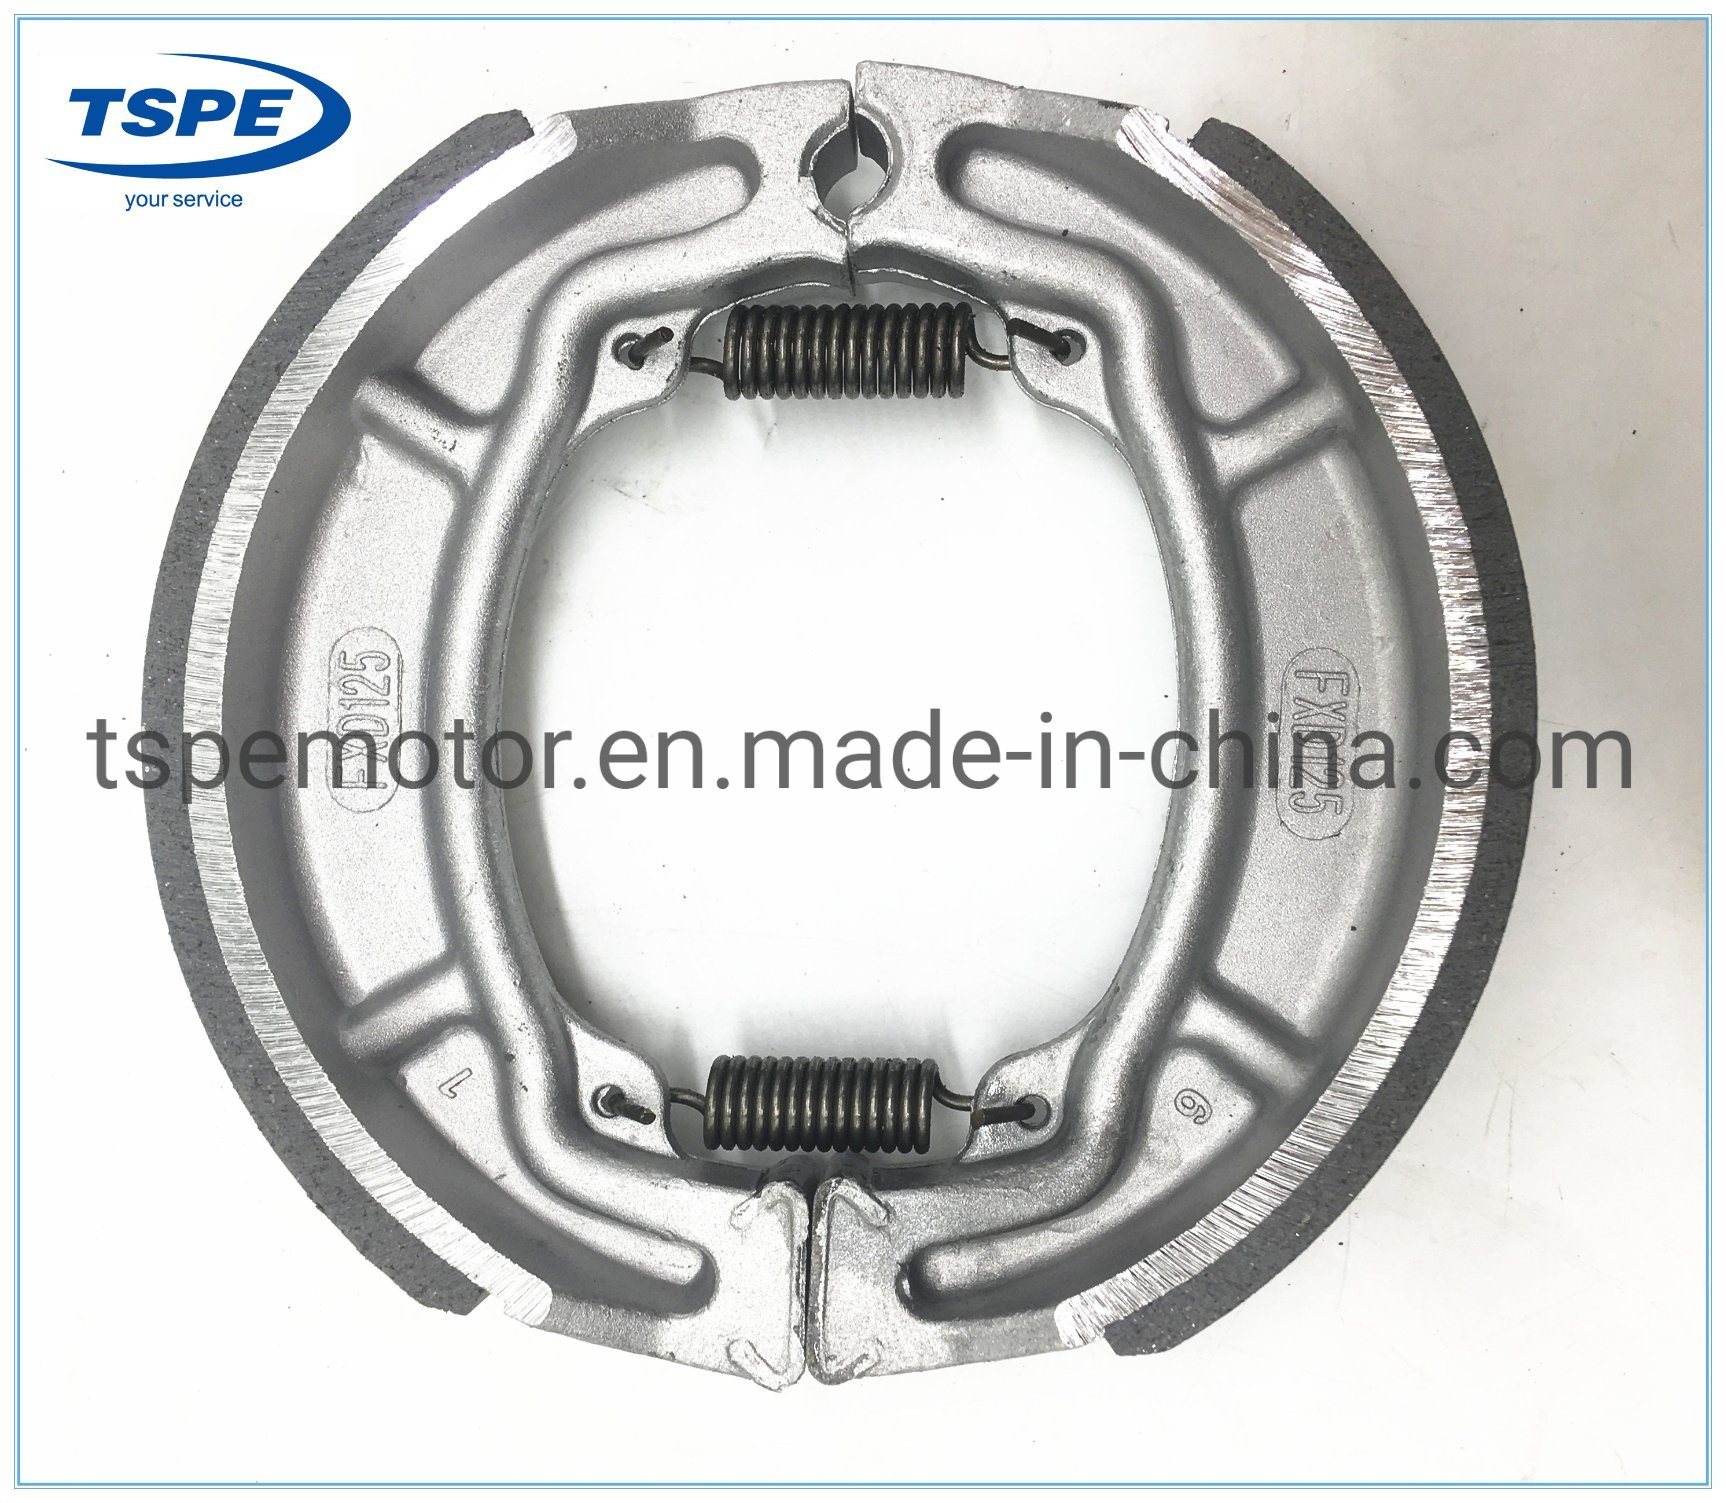 Non-Asbestos Motorcycle Brake Shoes Motorcycle Parts for Ds 150